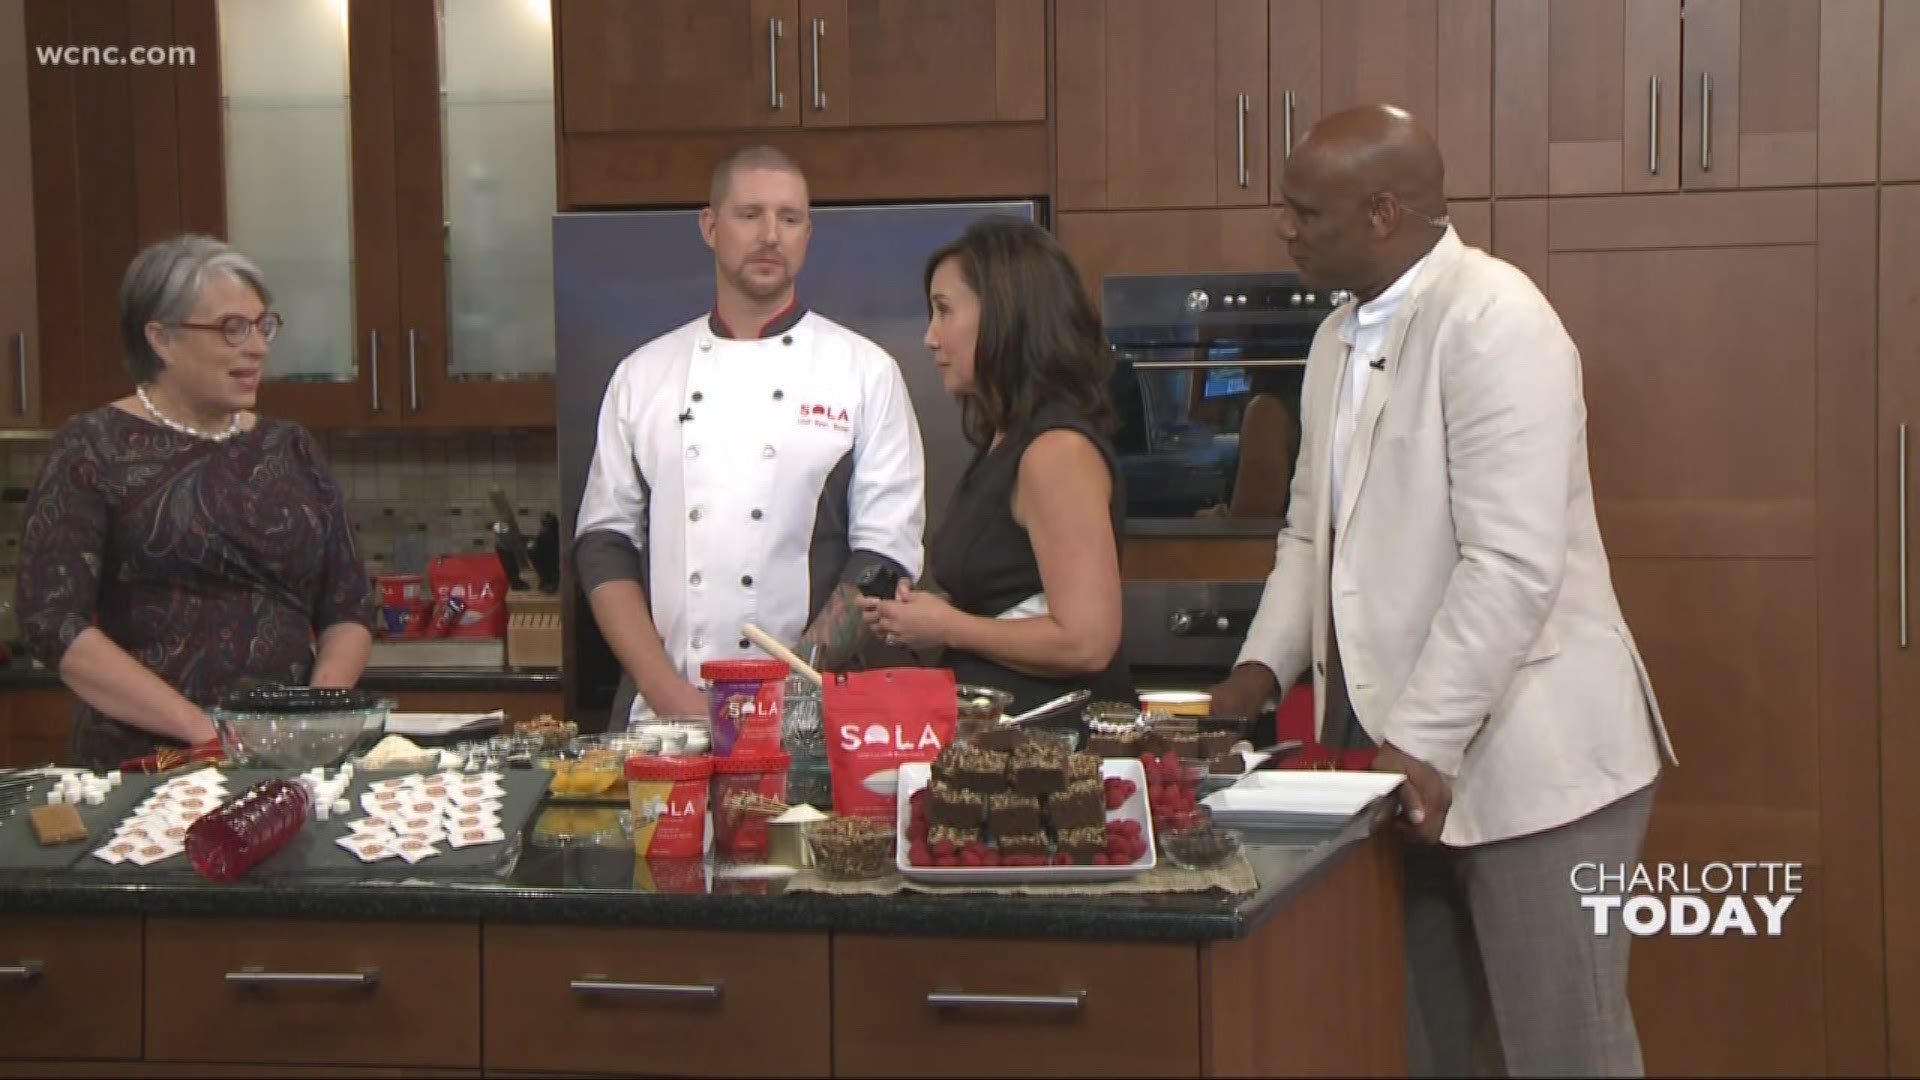 Chef Ryan Turner with SOLA is sharing his recipe.